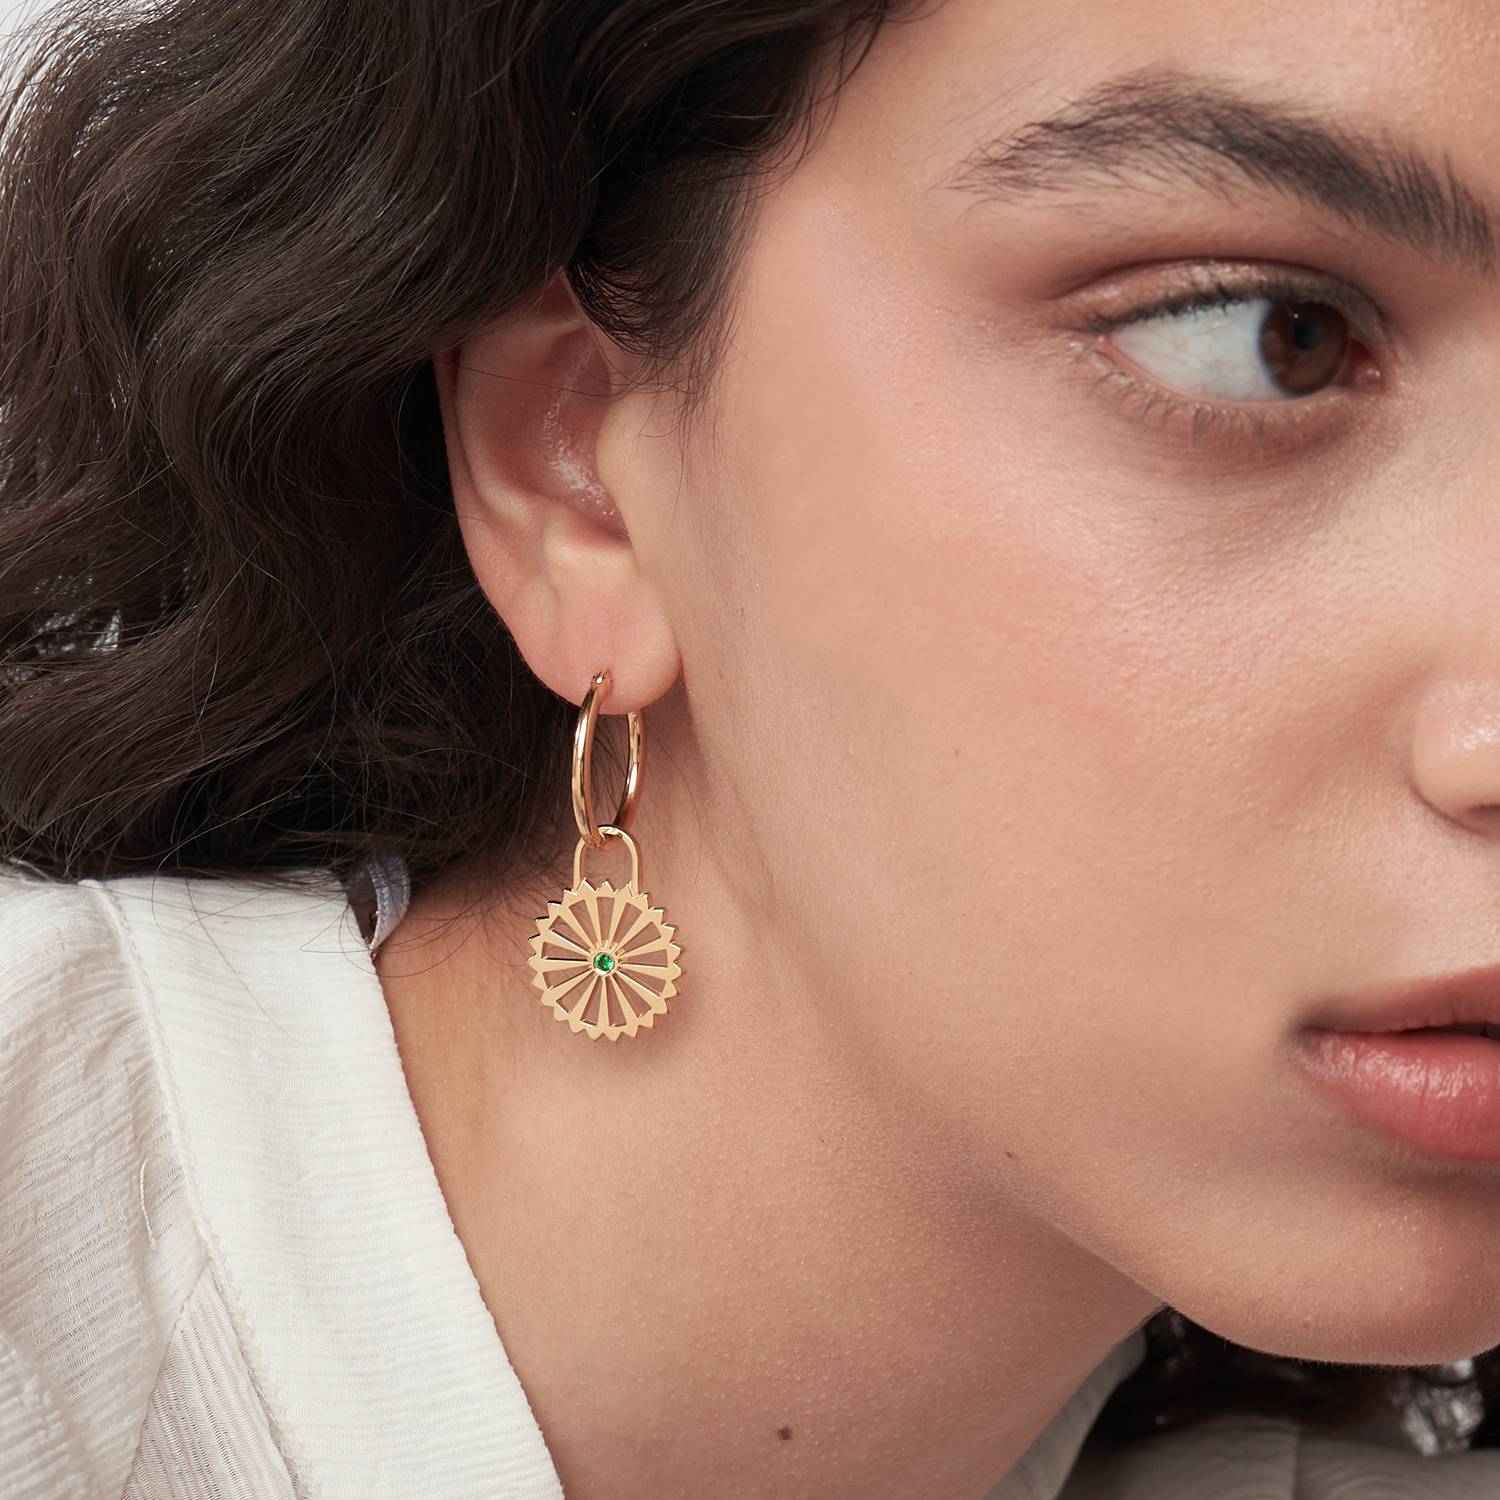 Sun Compass Hoop Earrings with Cubic Zirconia  - Gold Vermeil-1 product photo